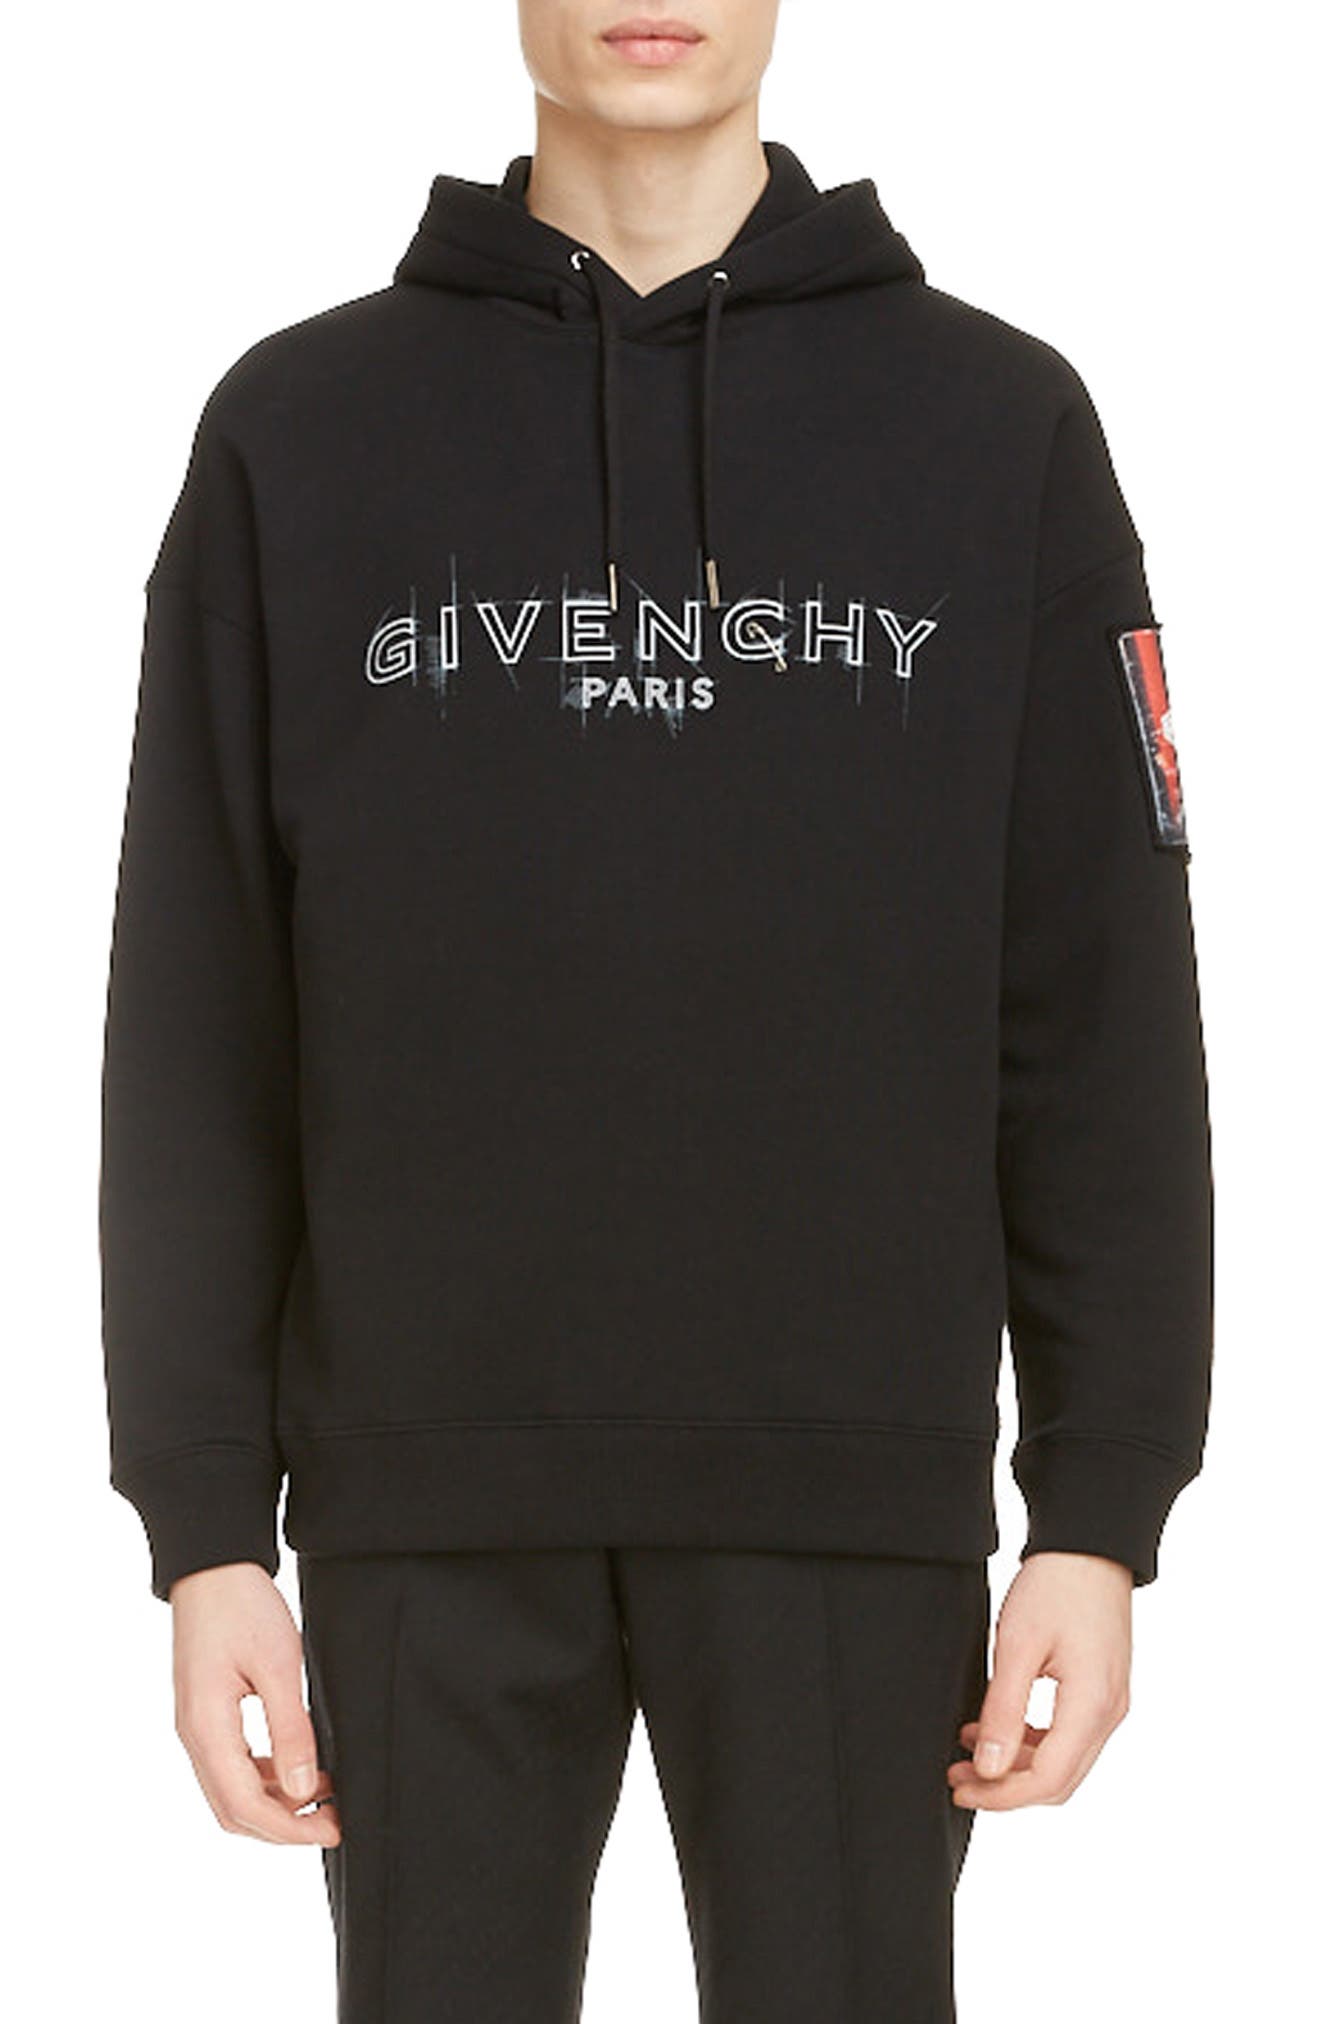 givenchy hoodie canada